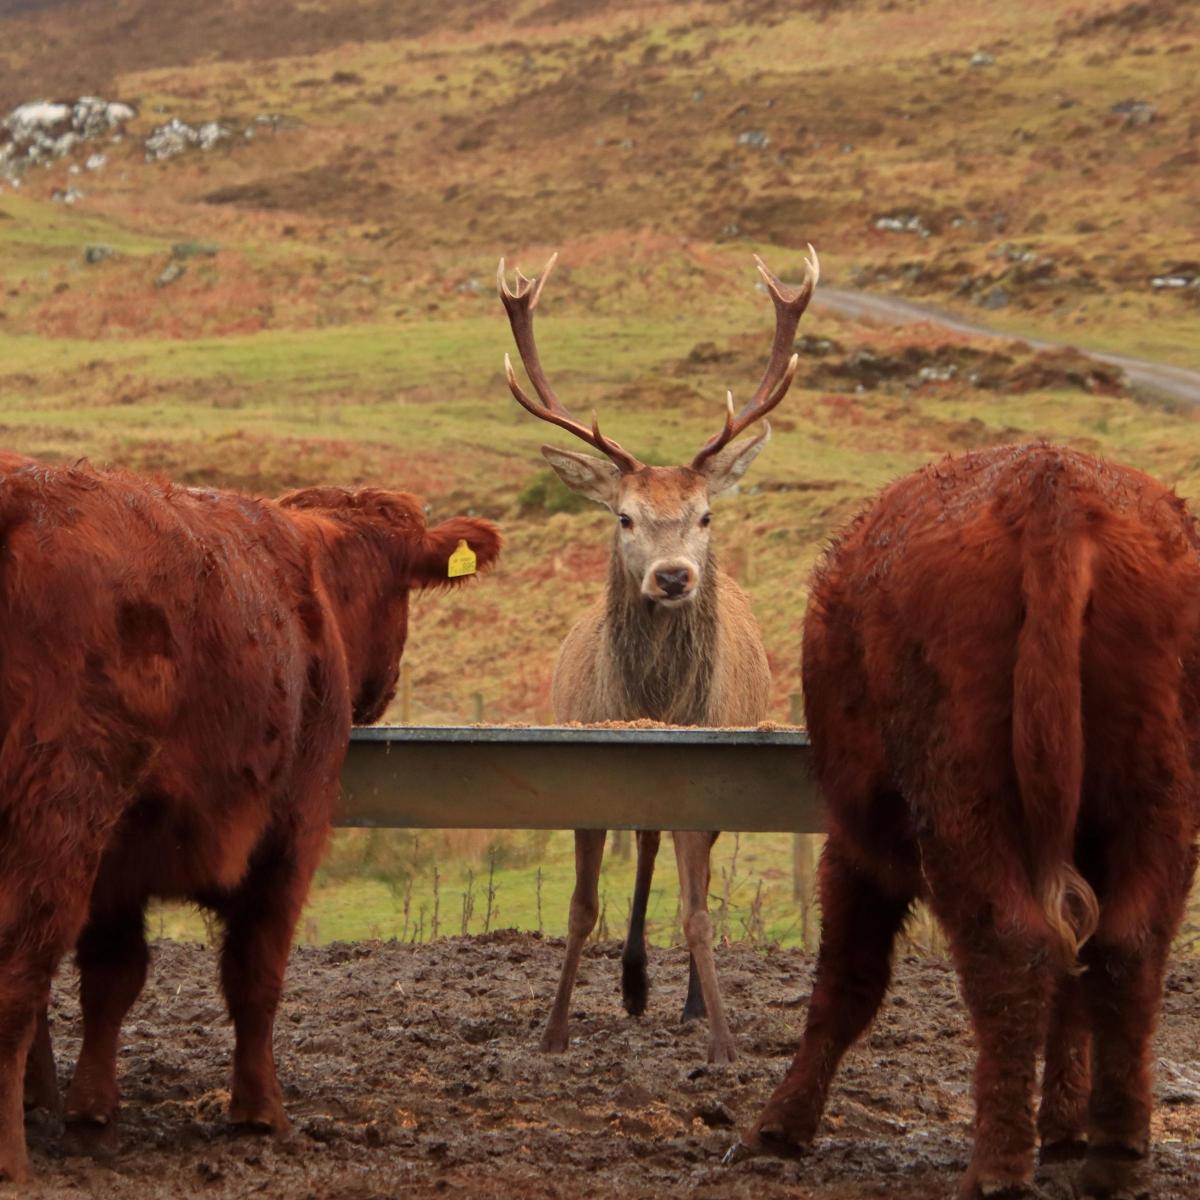 Drimnin Estate Luing Cattle (Morvern, West Coast Scotland) - Some breakfast guests need a little more elbow room than others